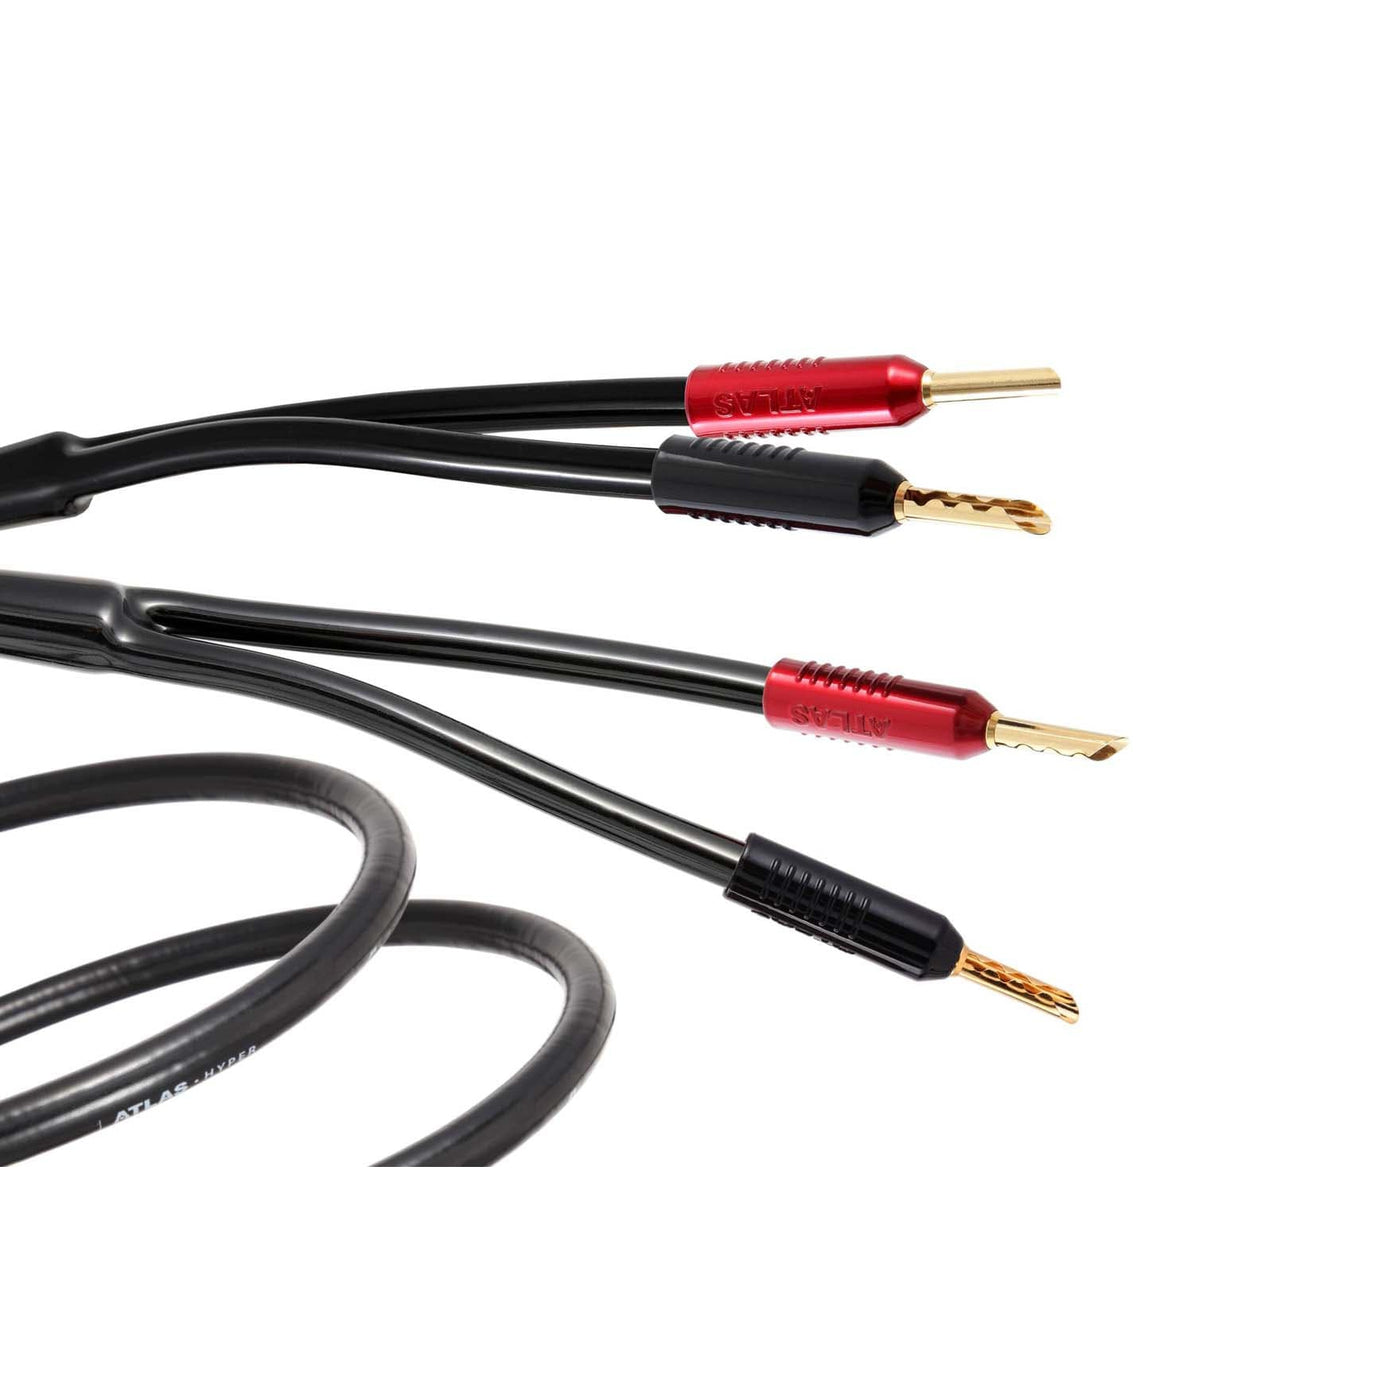 Atlas Hyper Achromatic 3.5 Speaker Cable at Audio Influence